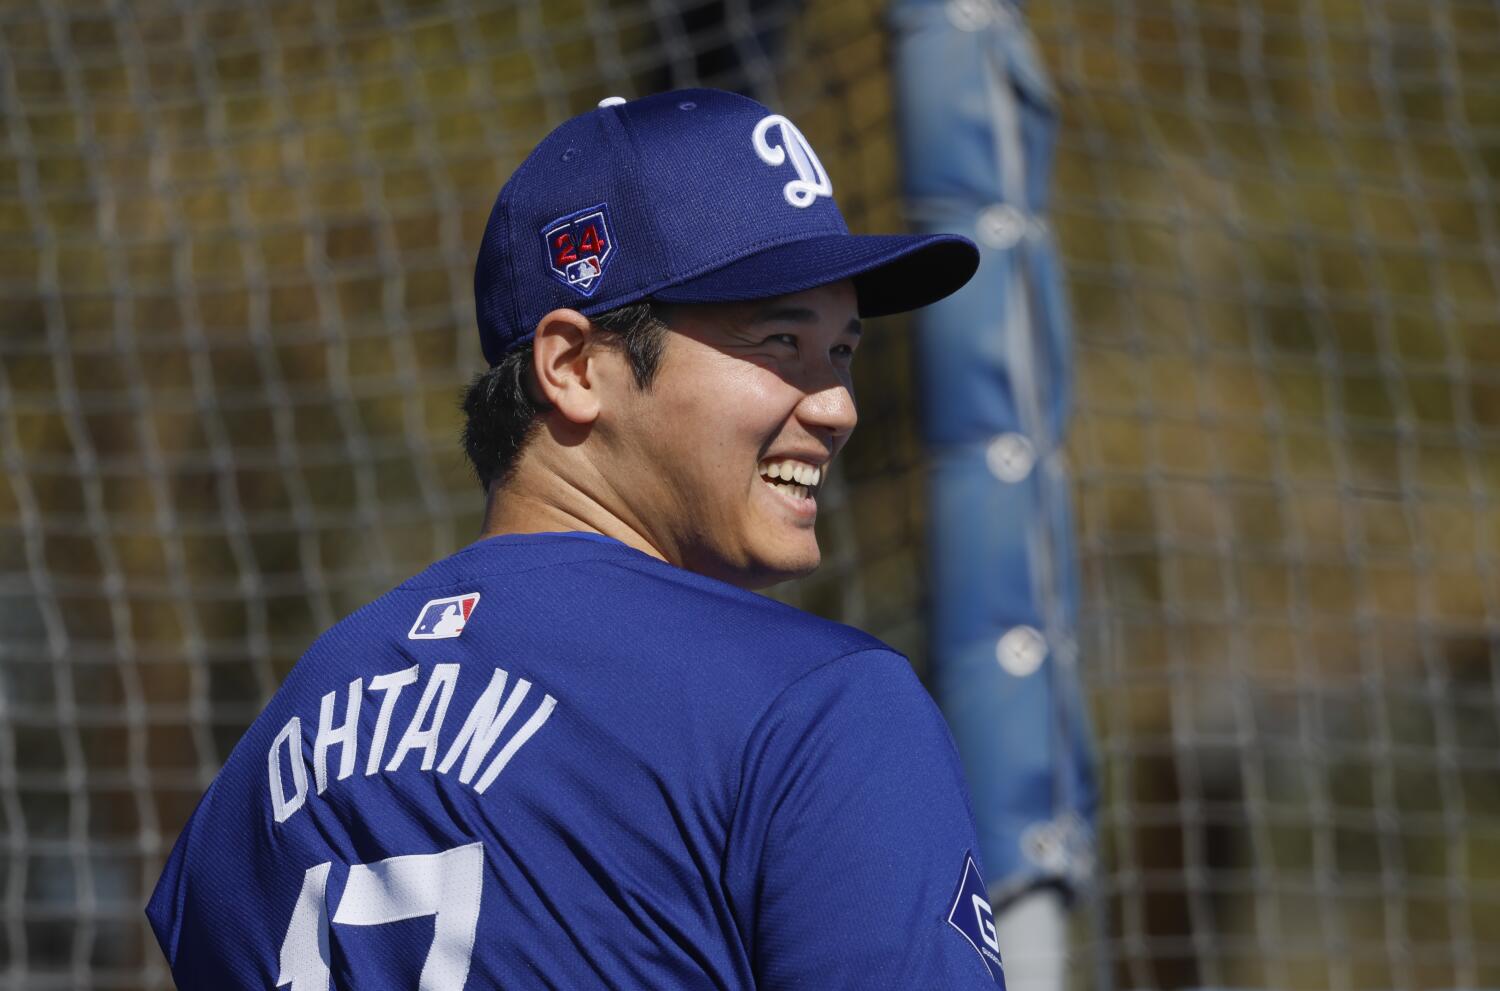 Hernández: Shohei Ohtani's personality will help him fit into Dodgers' clubhouse